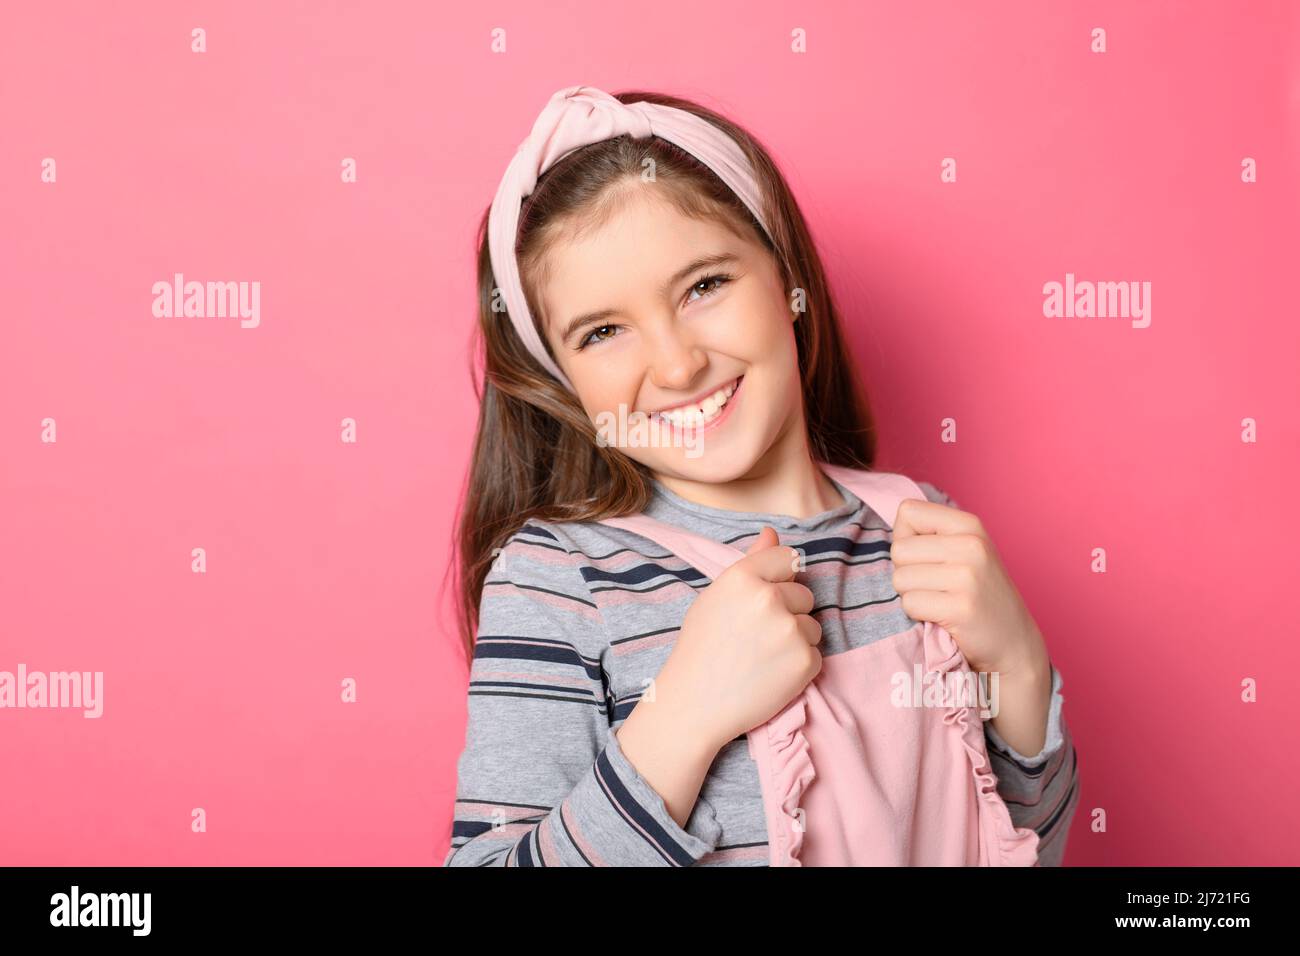 cute child with dungarees over pink background on studio Stock Photo